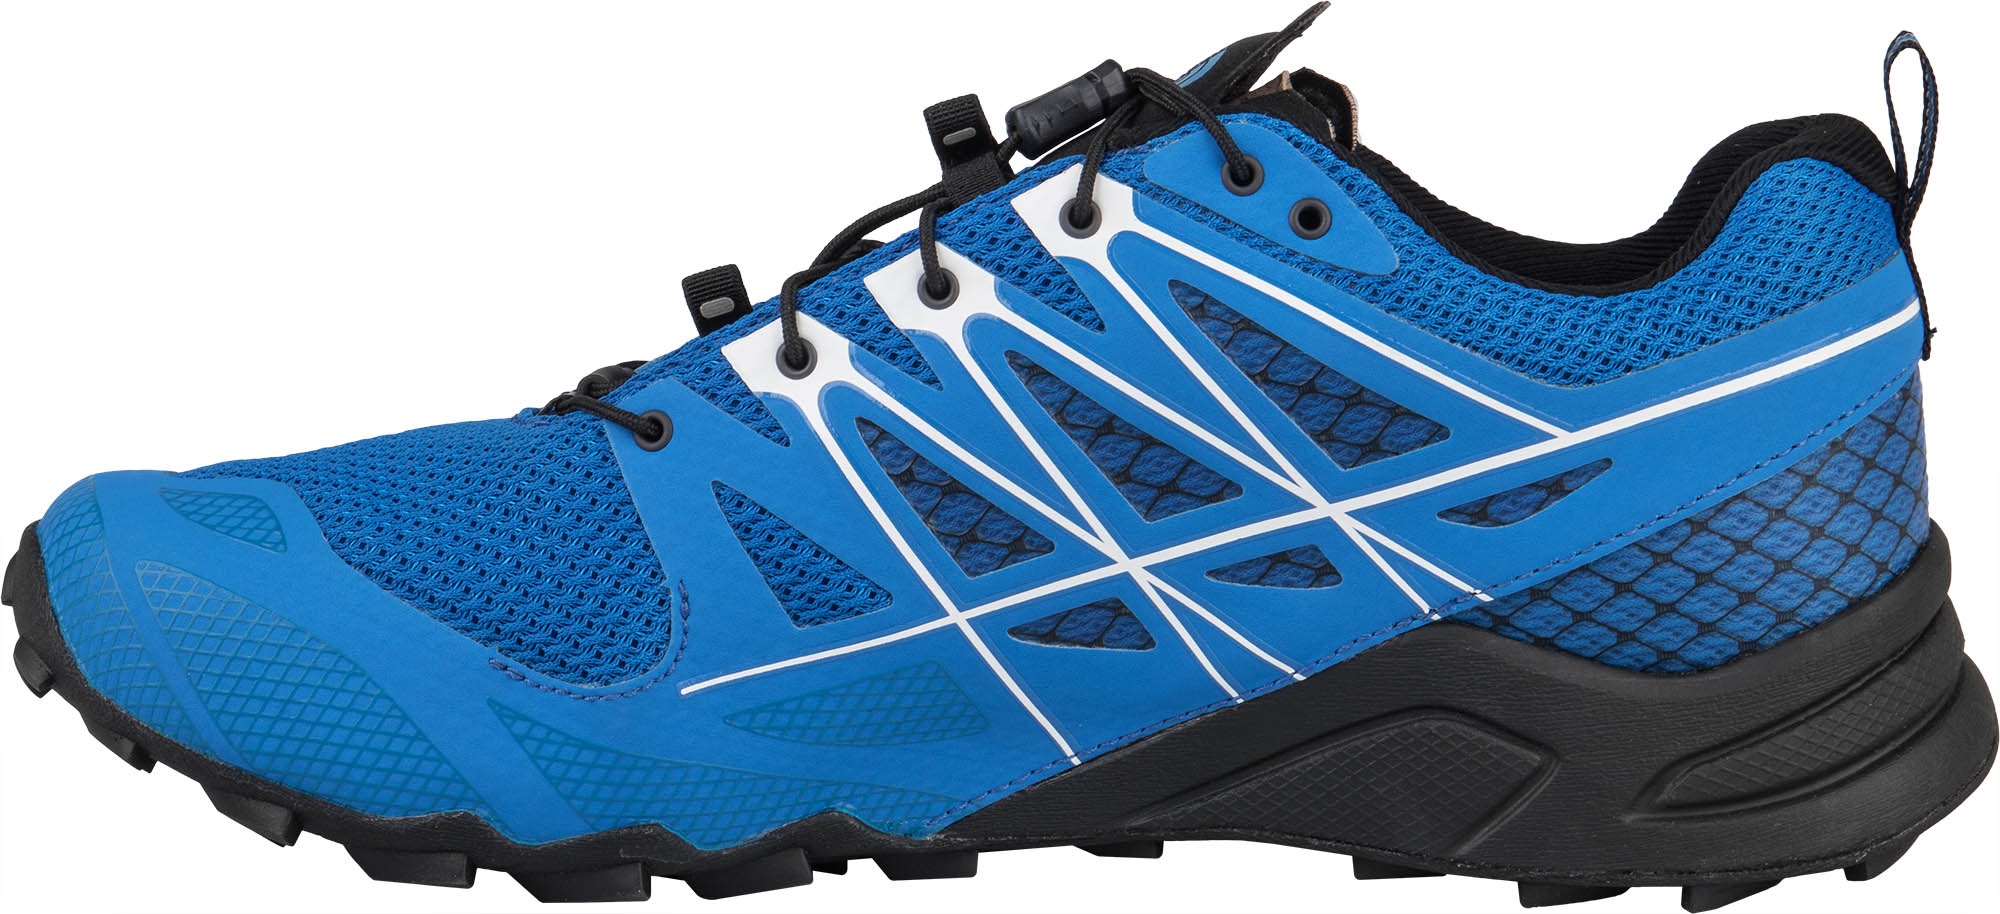 north face ultra mt ii gtx review